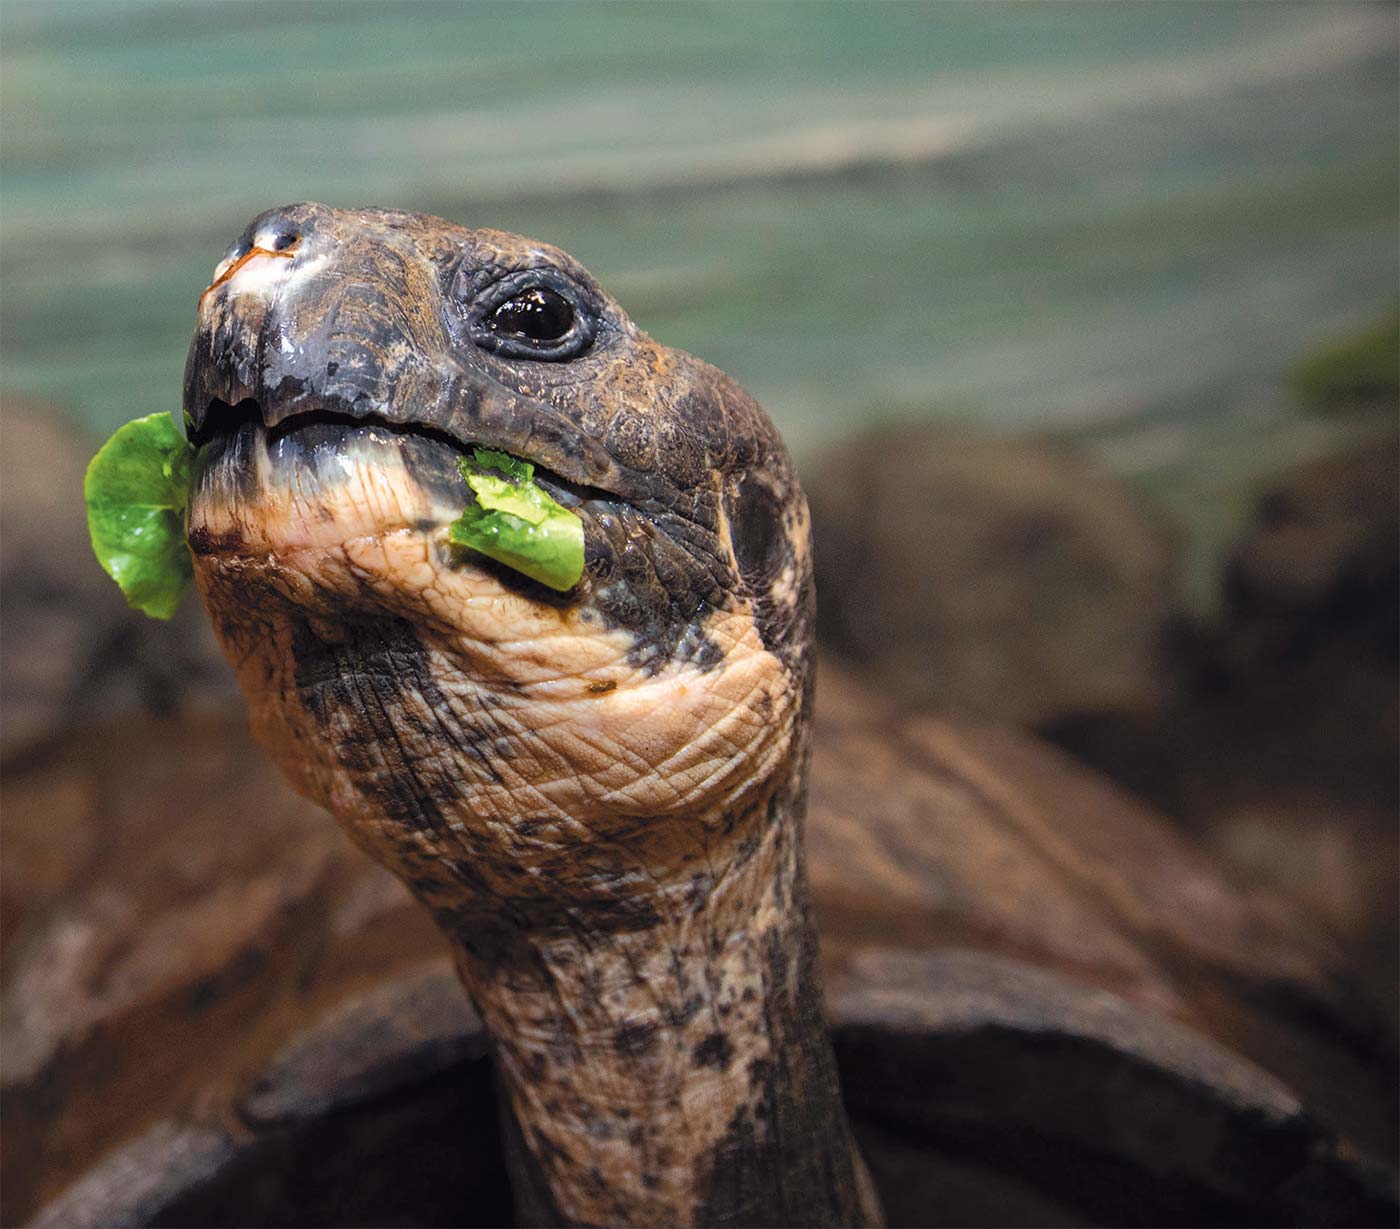 A tortoise has some salad for lunch.